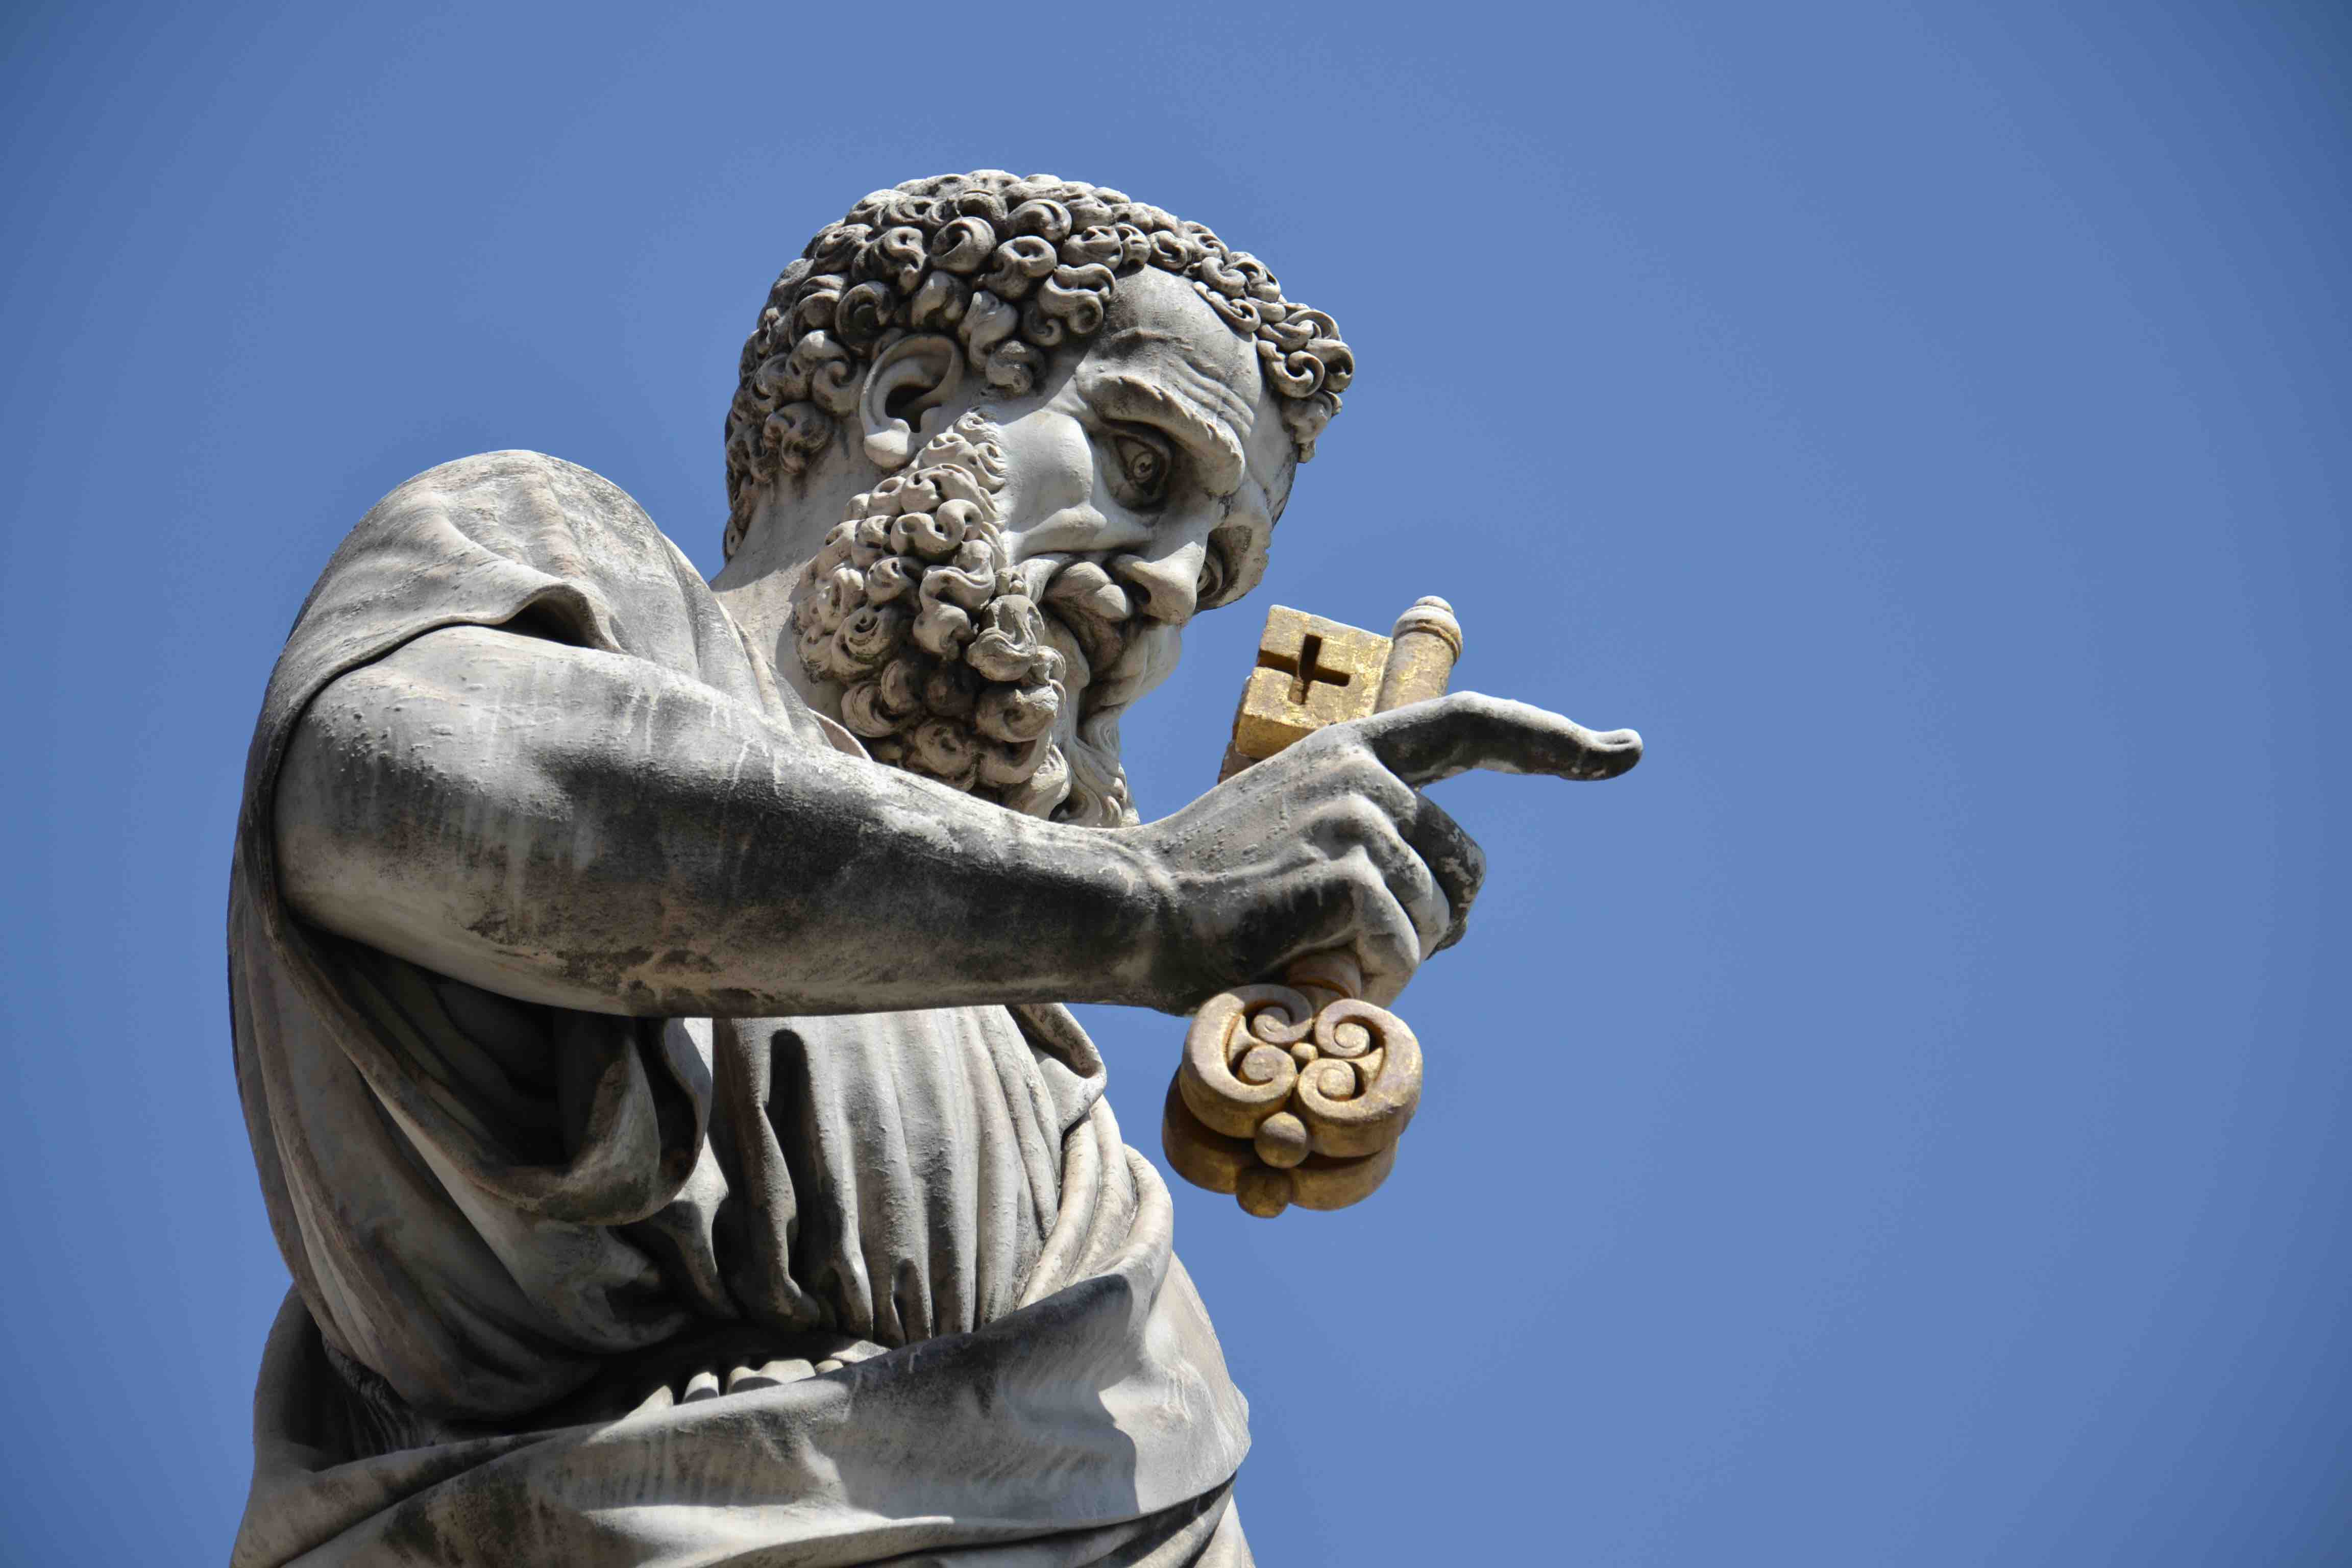 10 Fun Facts About St. Peter: Life and Legends of the Apostle - Facts.net